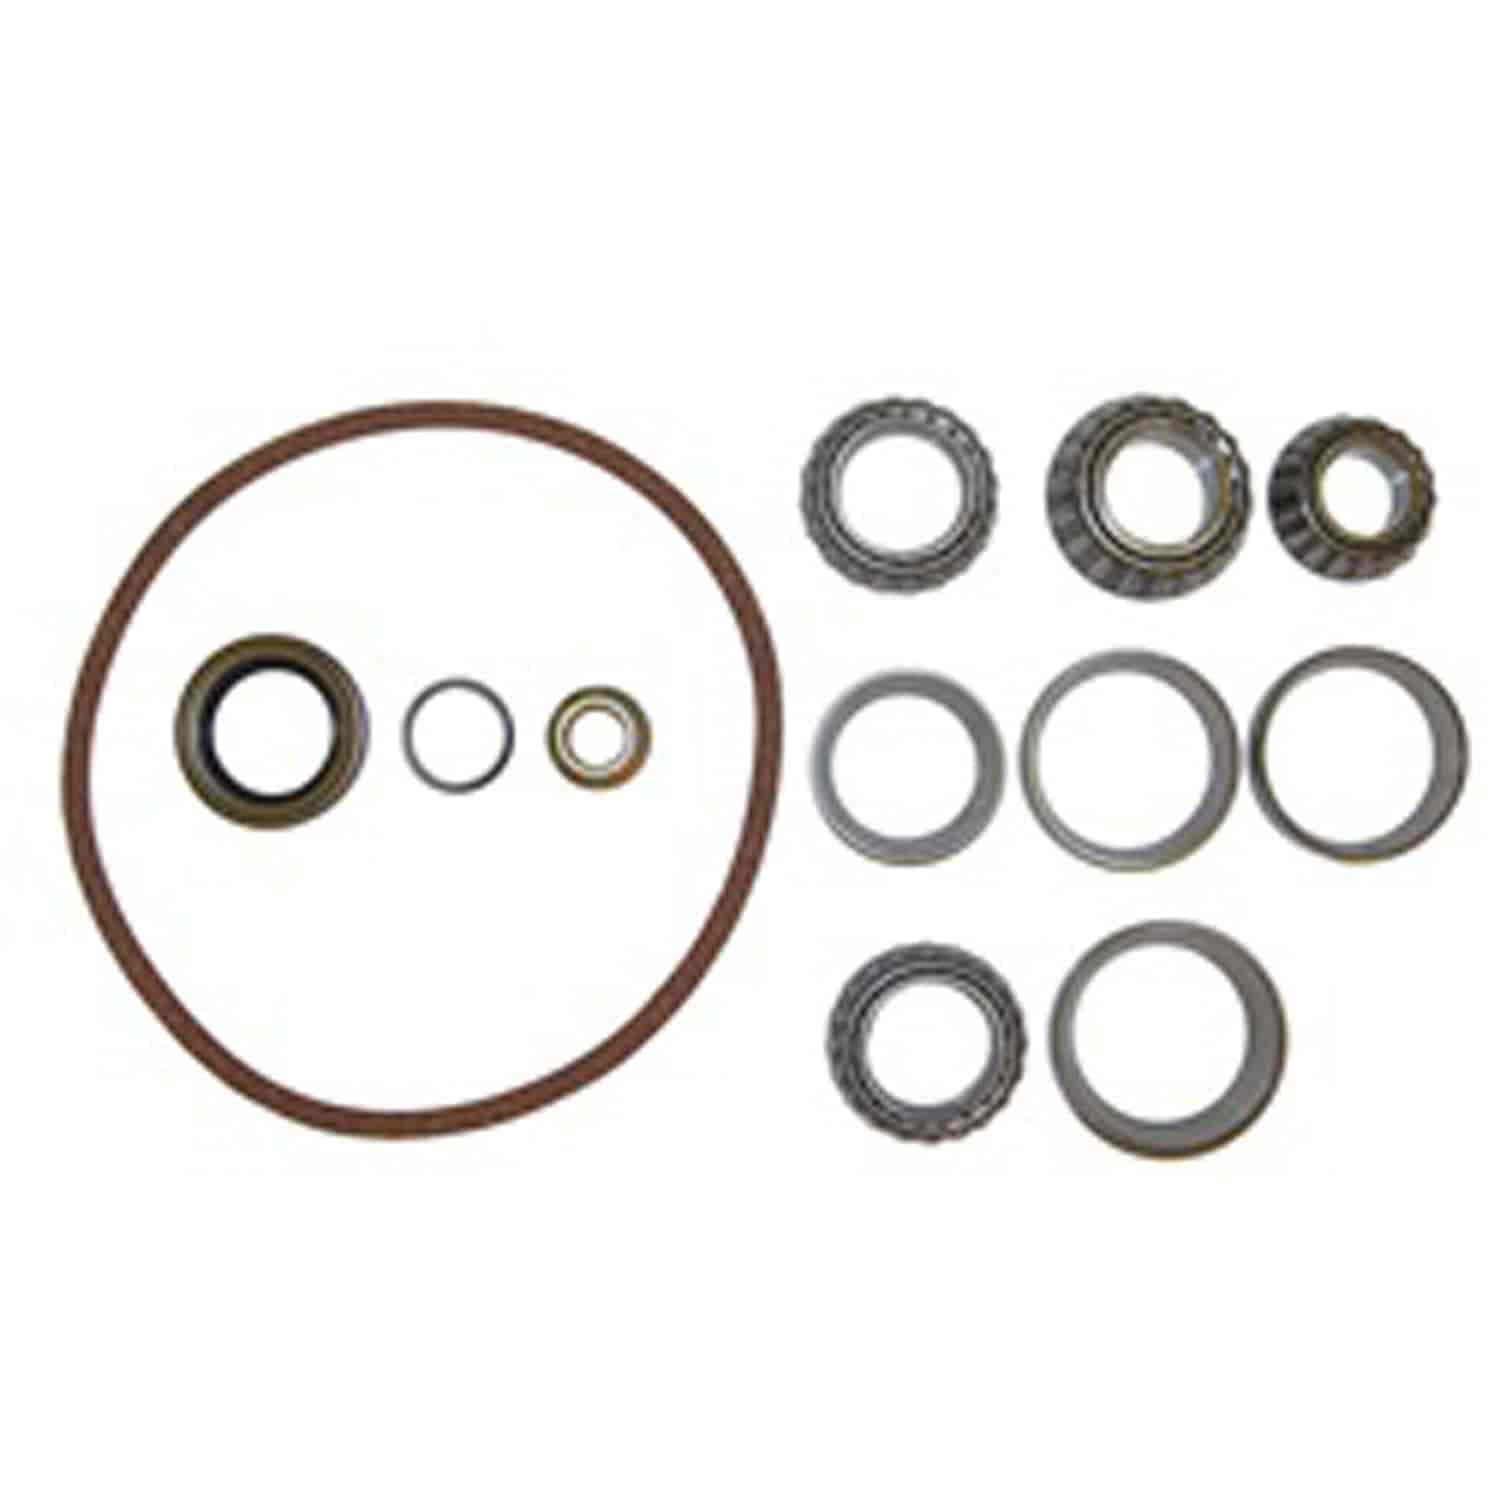 This differential rebuild kit from Omix-ADA fits AMC 20 76-86 Jeep CJ Models